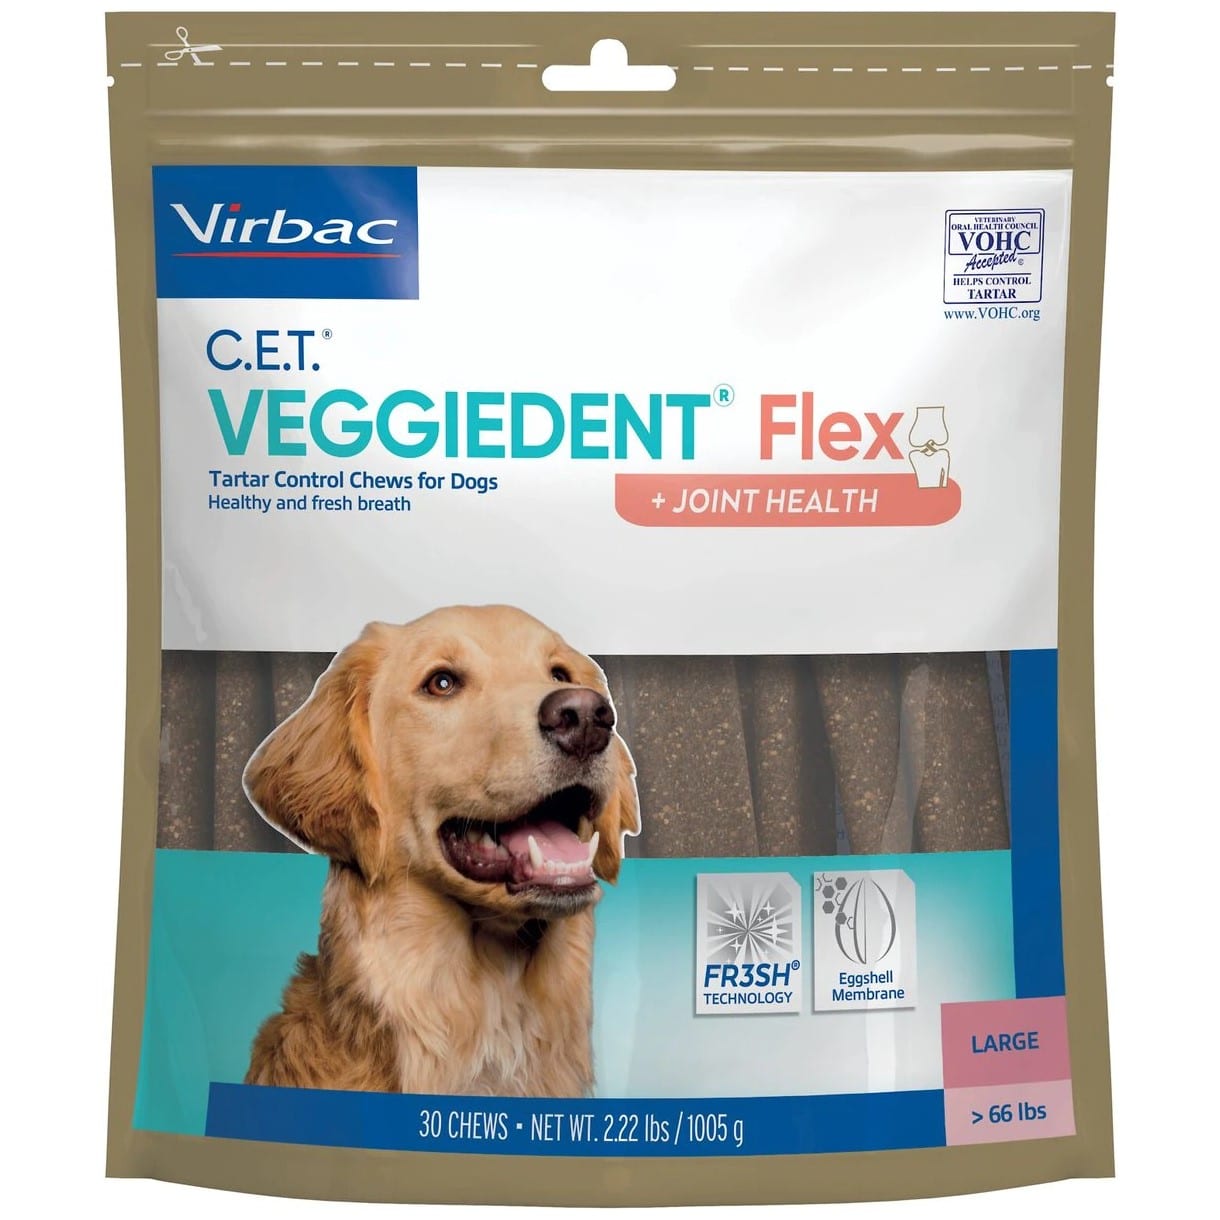 Virbac C.E.T. VeggieDent Flex + Joint Health Dental Chews for Large Dogs, over 66lbs